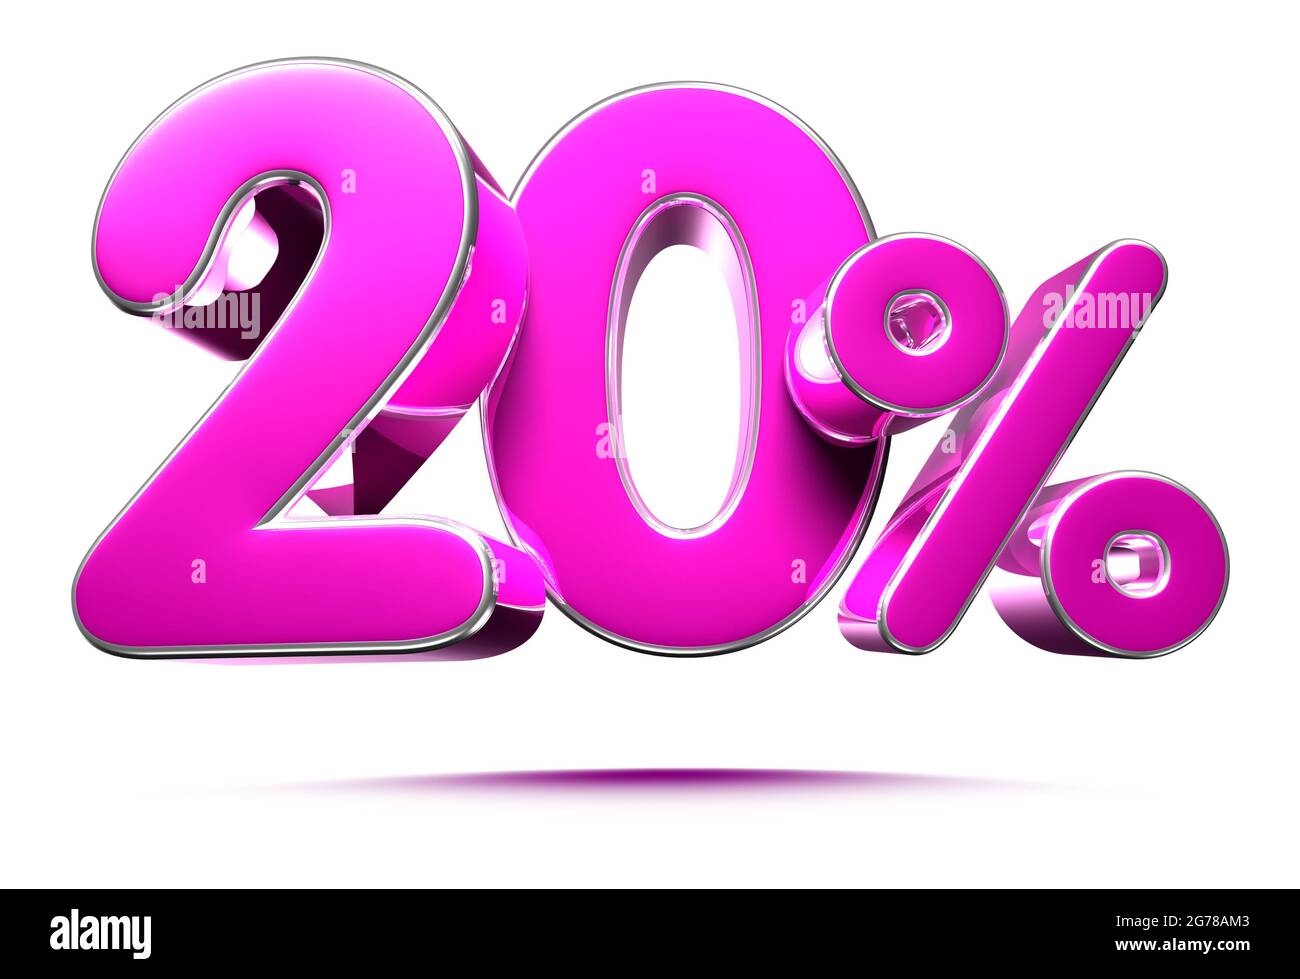 Pink 20 Percent 3d illustration Sign on White Background, Special Offer 20%  Discount Tag, Sale Up to 20 Percent Off,share 20 percent,20% off storewide  Stock Photo - Alamy